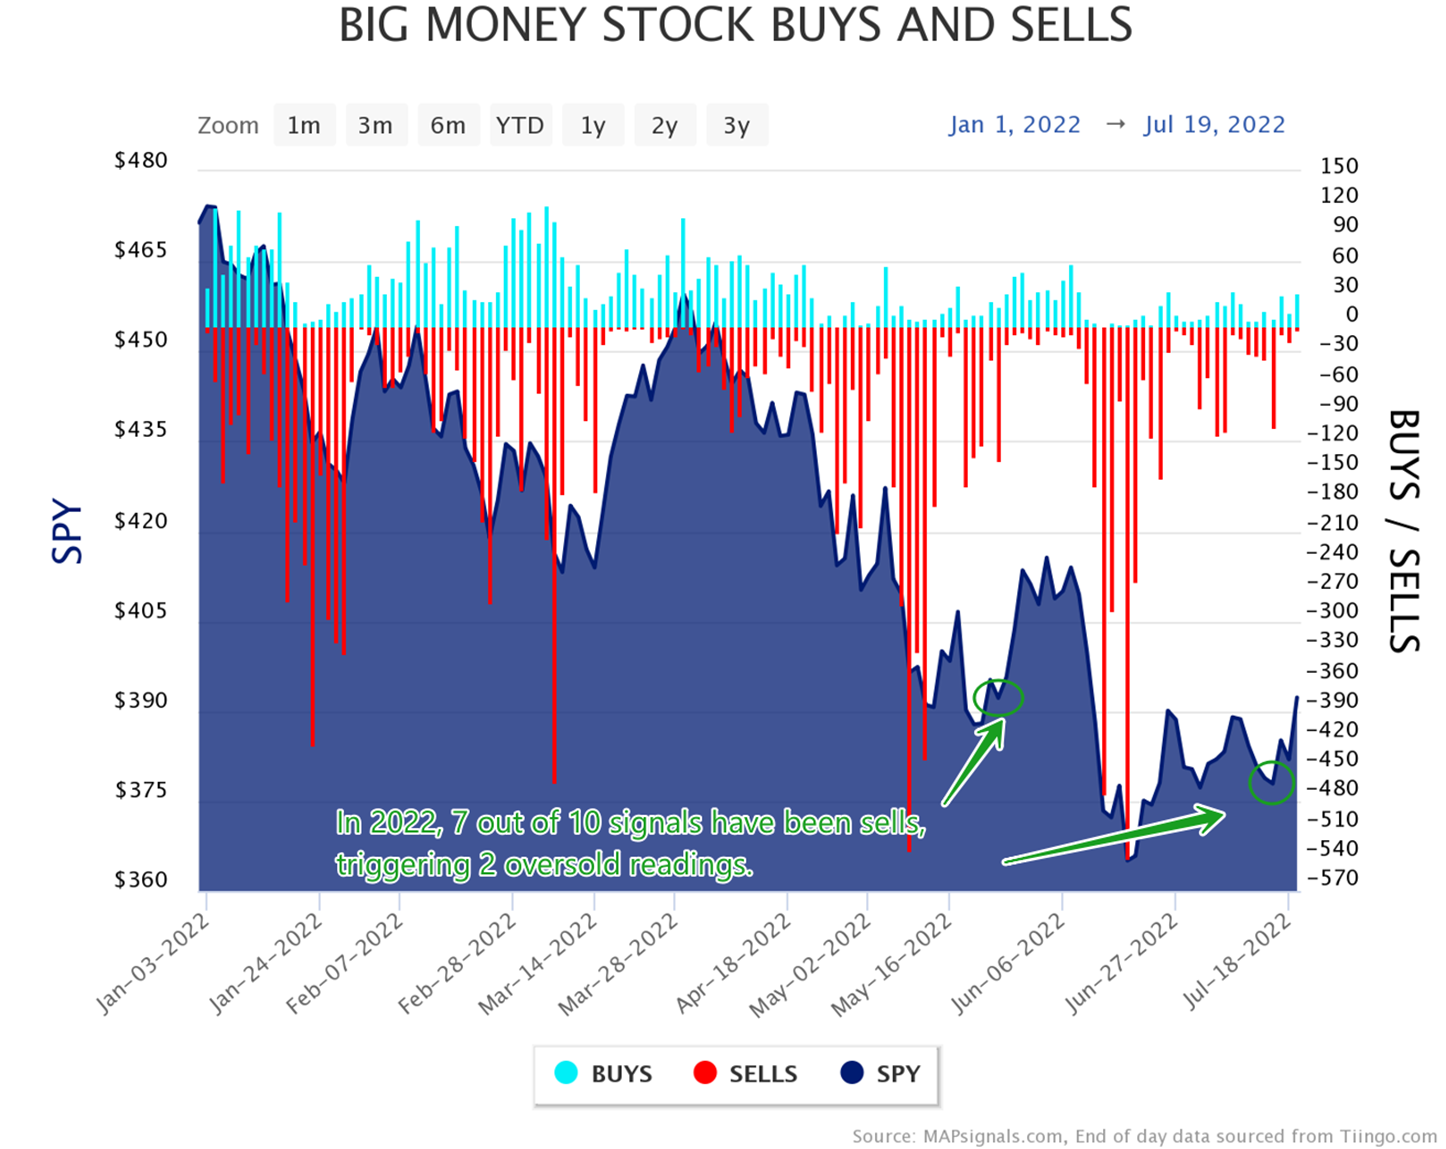 In 2022, 7 out of 10 sell signals trigger 2 oversold readings | Big Money stock buys and sells